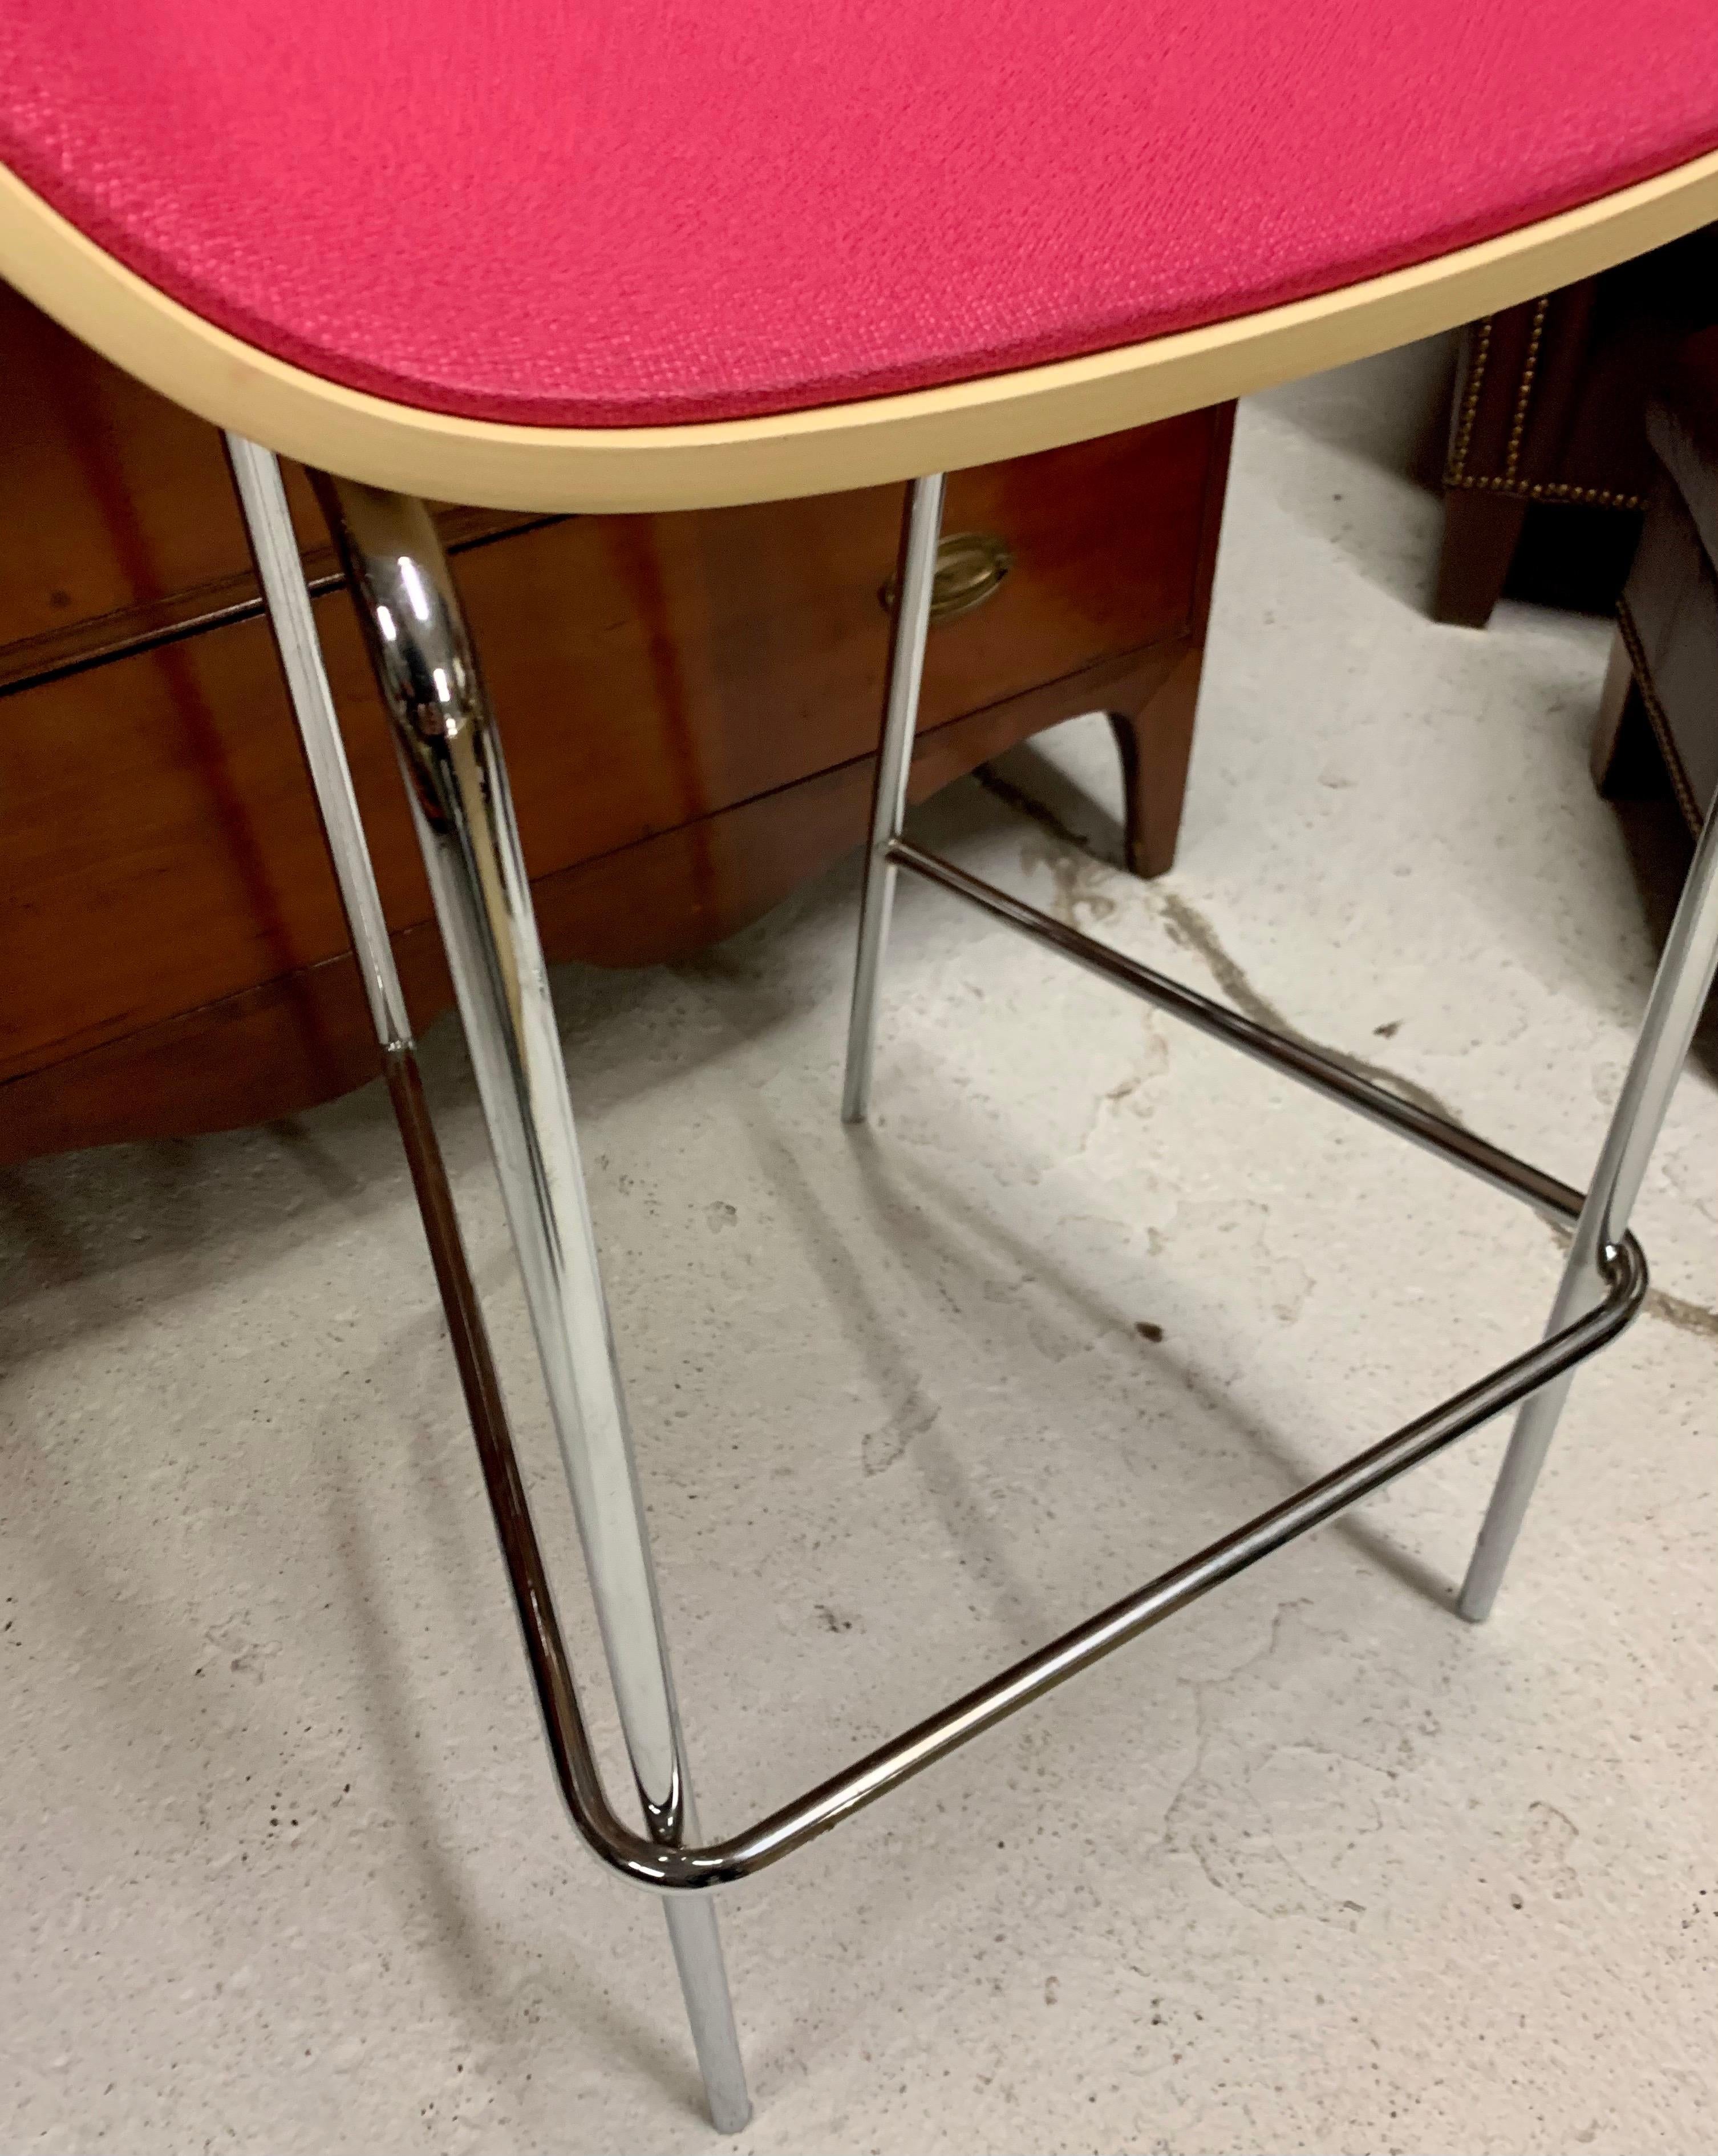 American Mid-Century Modern Set of Counter Bar Stools Chairs